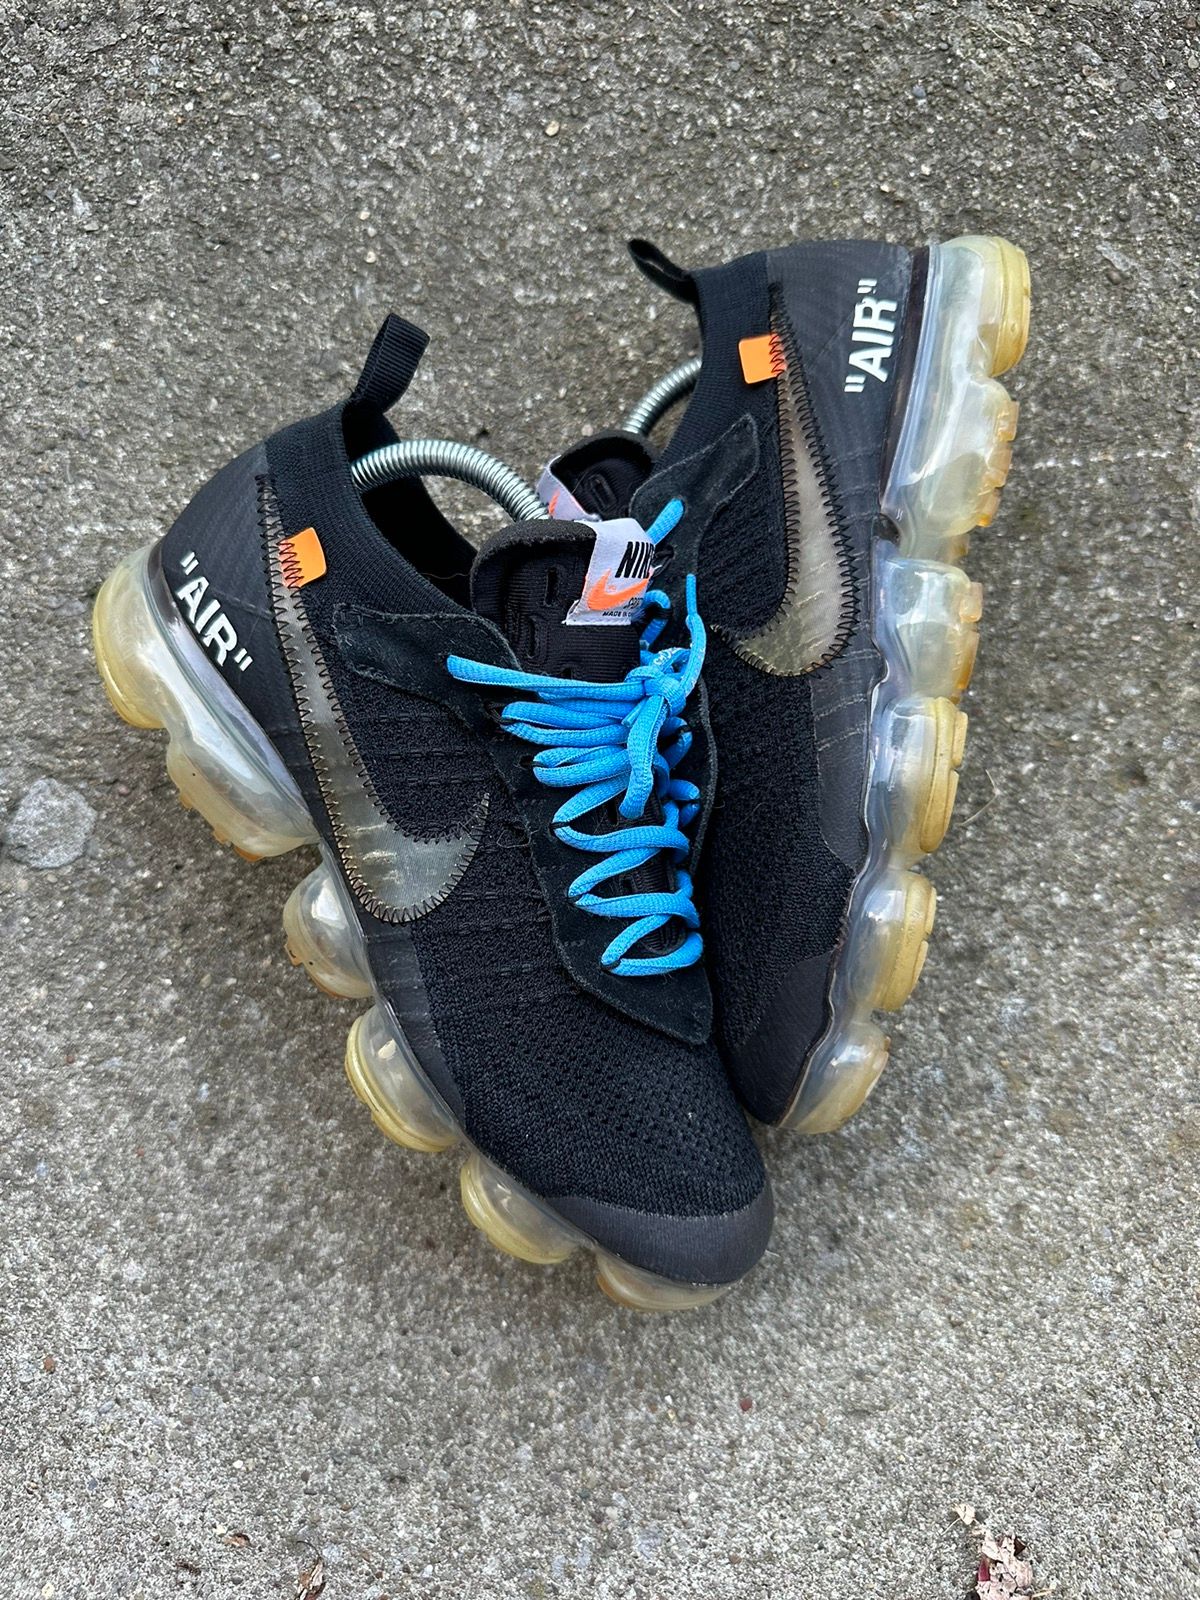 Pre-owned Nike X Off White Nike Vapormax Part 2 Size 8.5 Shoes In Black